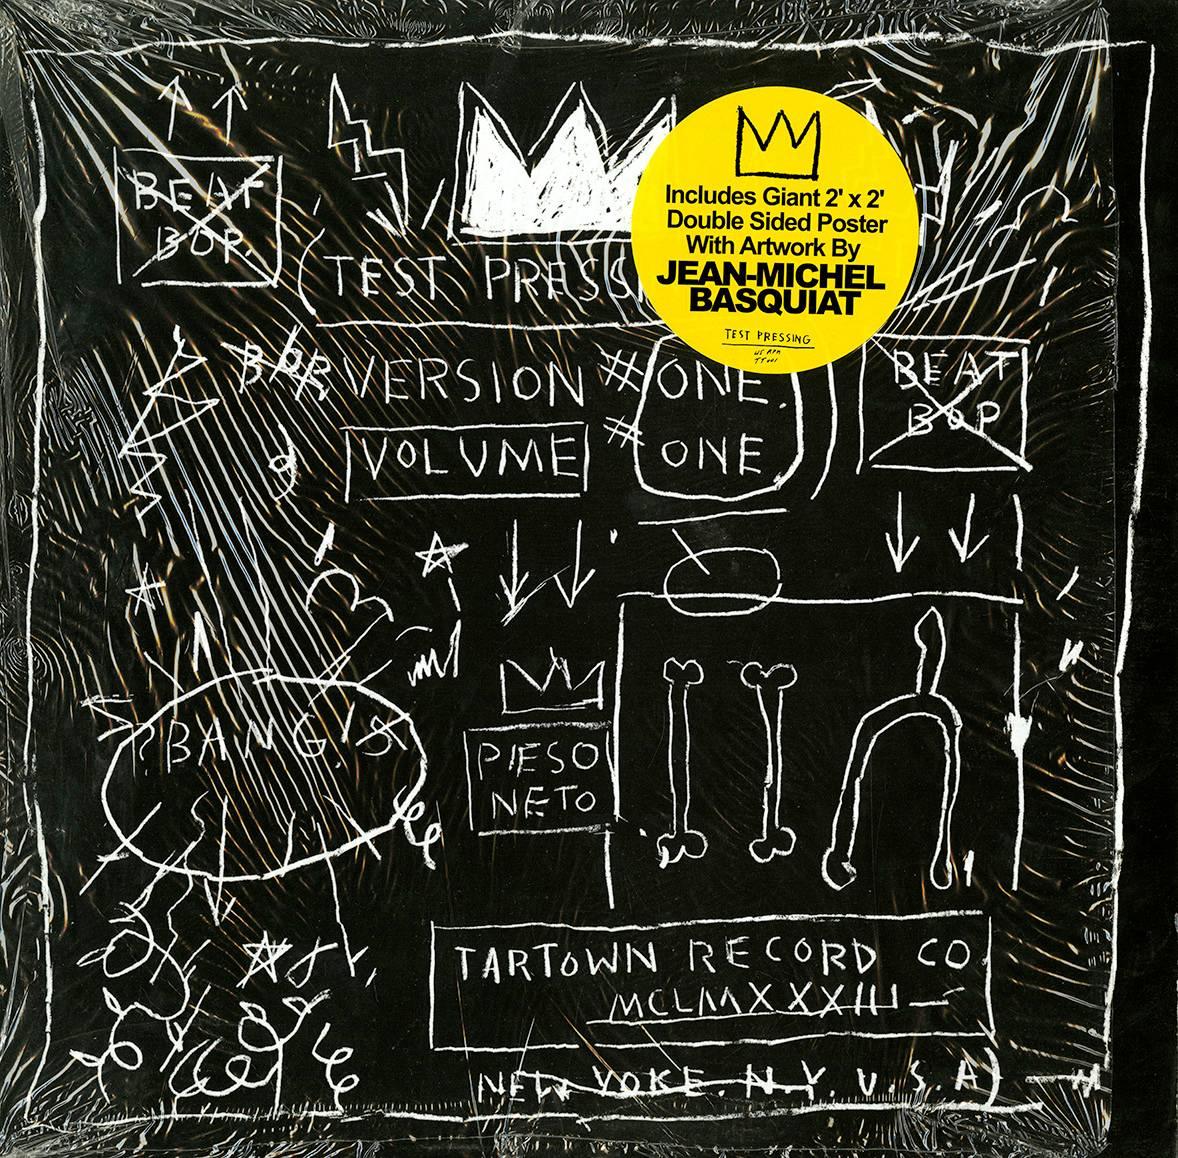 Basquiat Beat Bop record art and poster  - Print by (after) Jean-Michel Basquiat